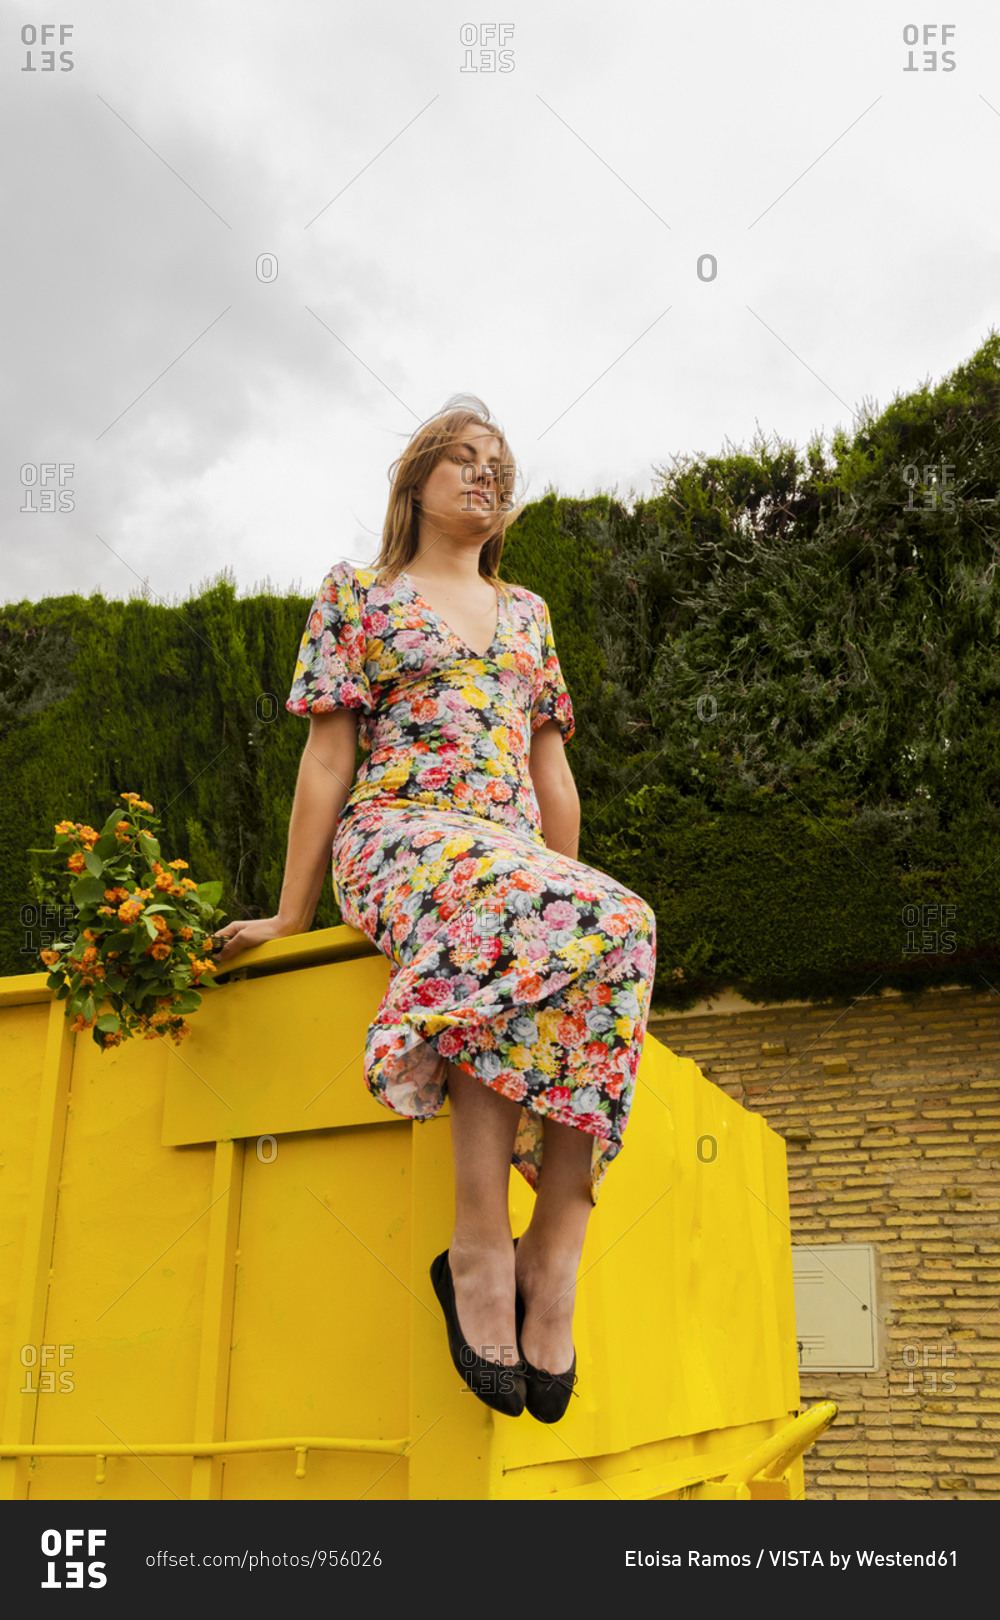 Woman in flower dress sitting on edge of yellow container- holding bunch of flowers